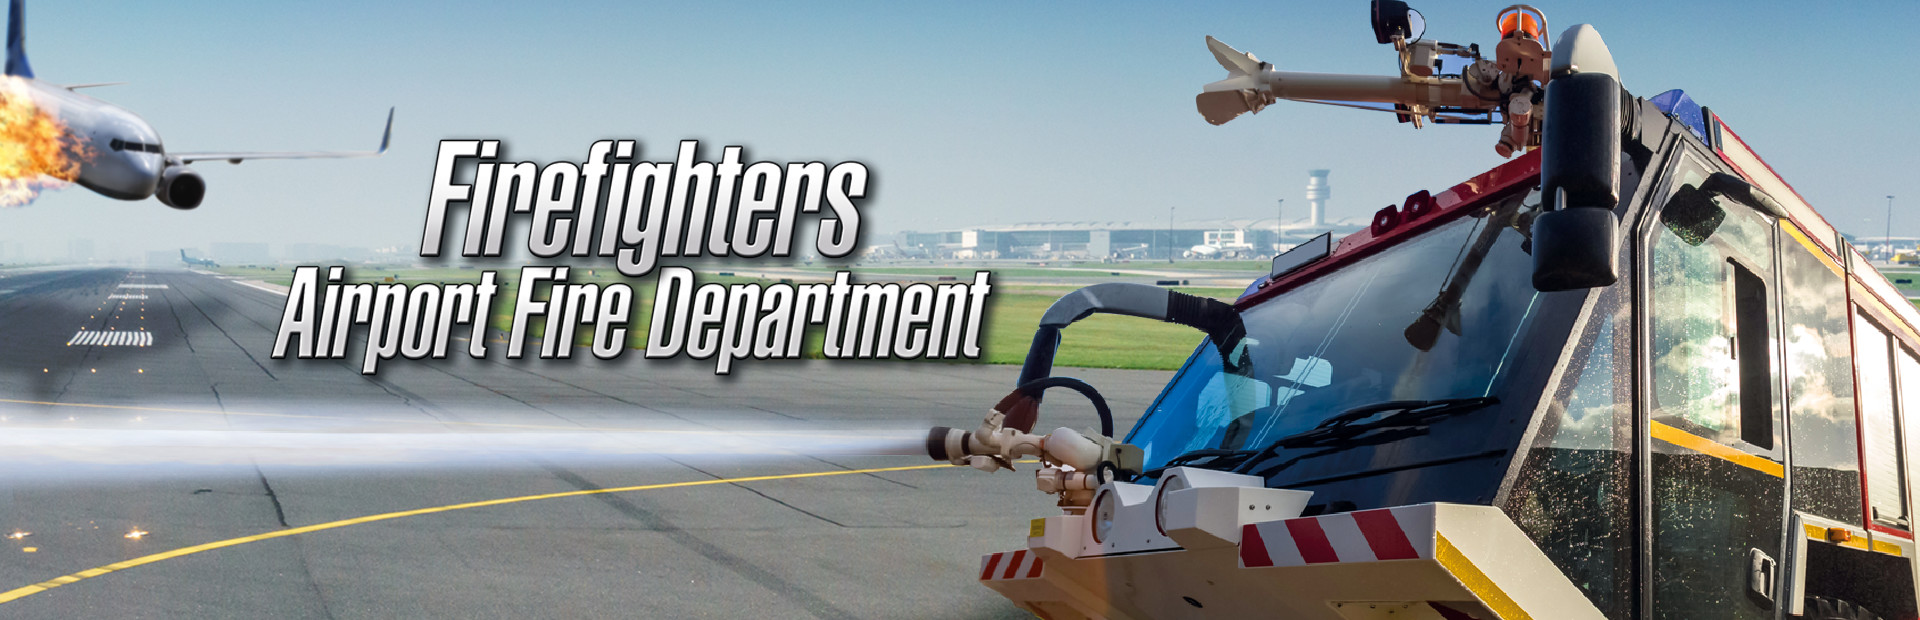 Airport Fire Department - The Simulation cover image